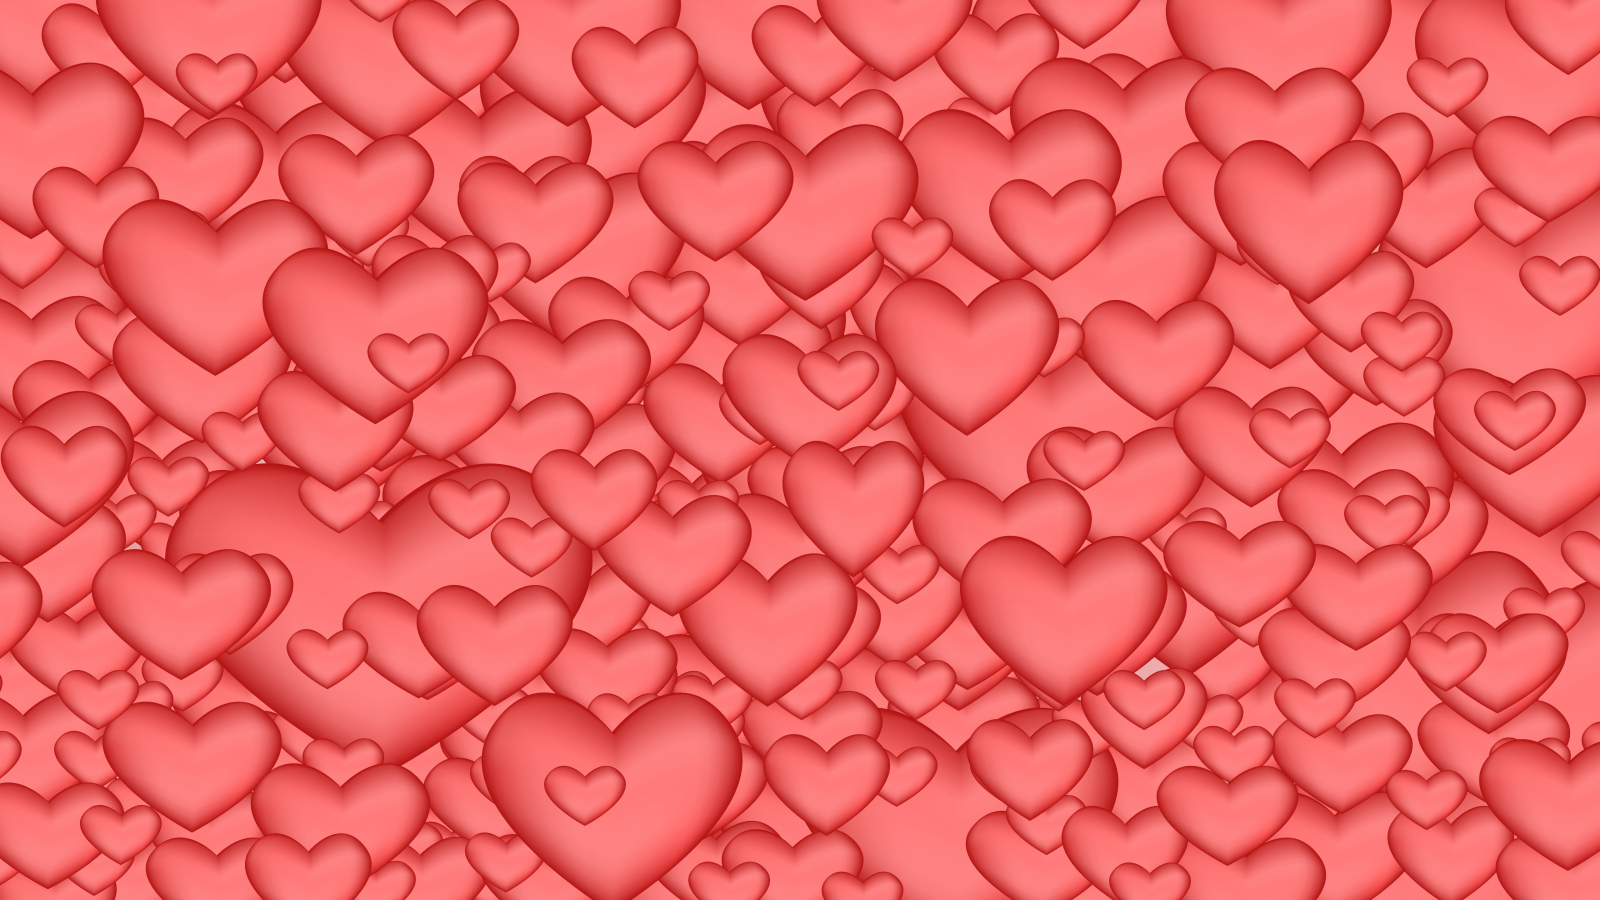 Many red hearts of different sizes